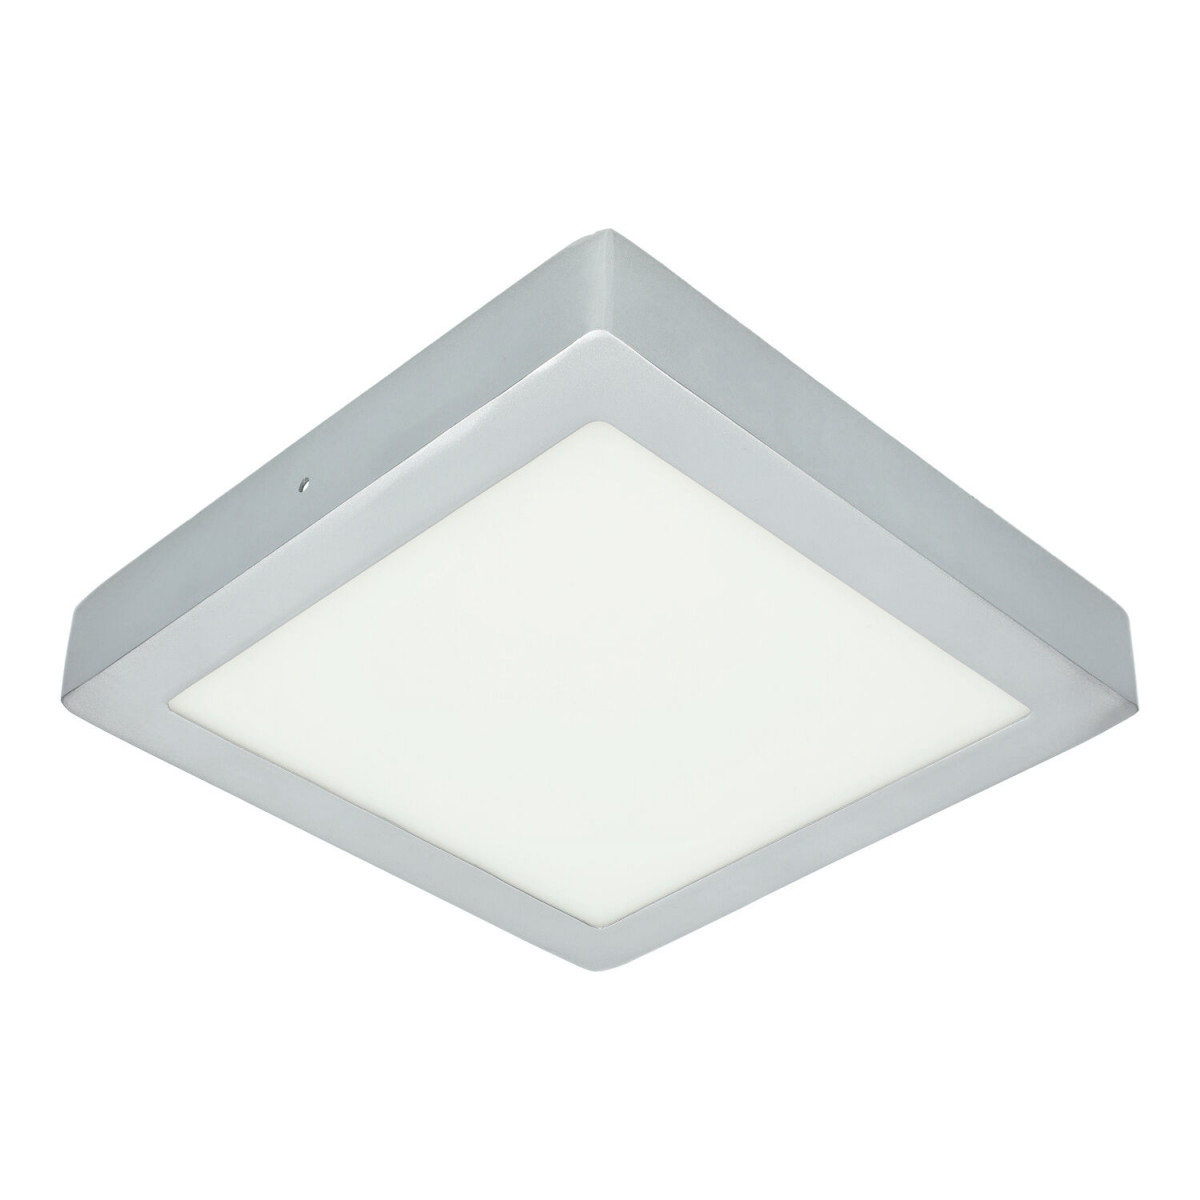 LED Ceiling Light - Square, 18W silver